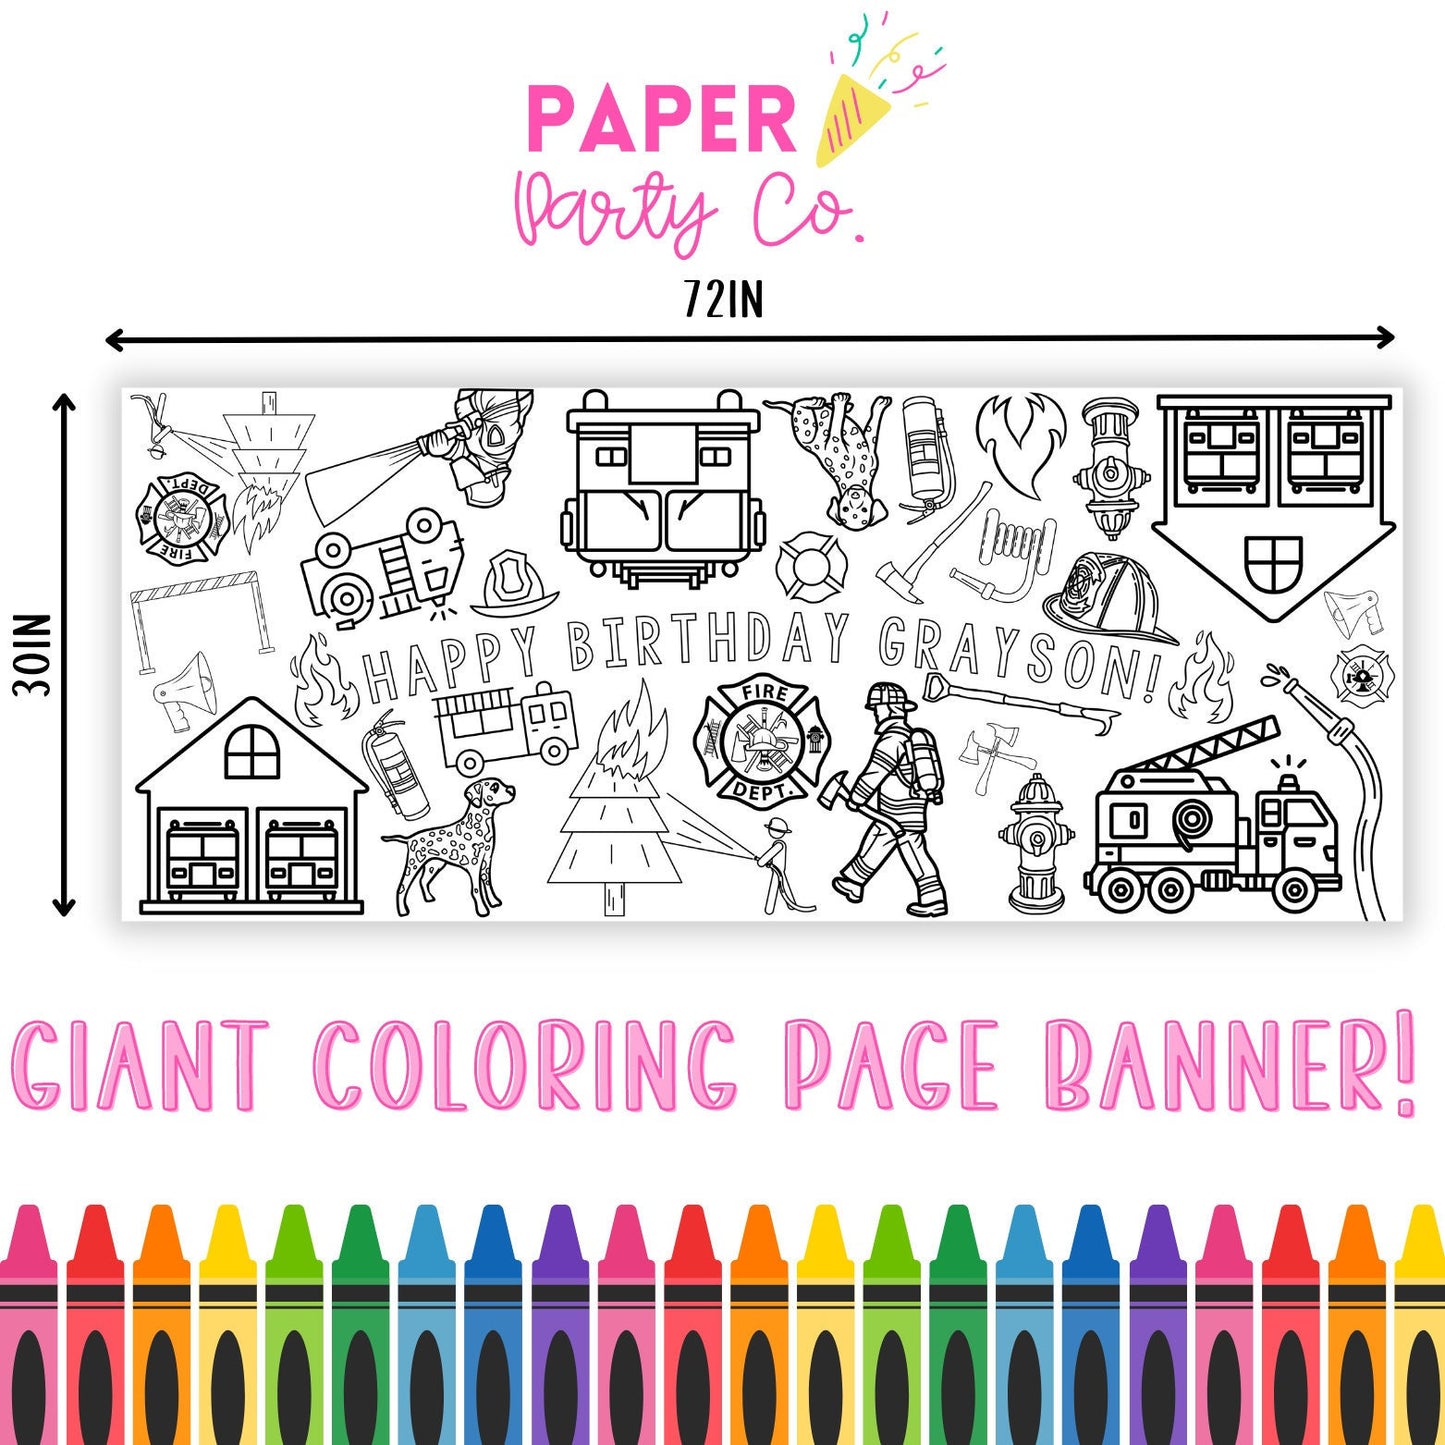 Firetruck Coloring Activity Tablecloth | Giant Coloring Banner | Coloring Poster | Fireman Birthday Party |  Coloring Table Runner | Party